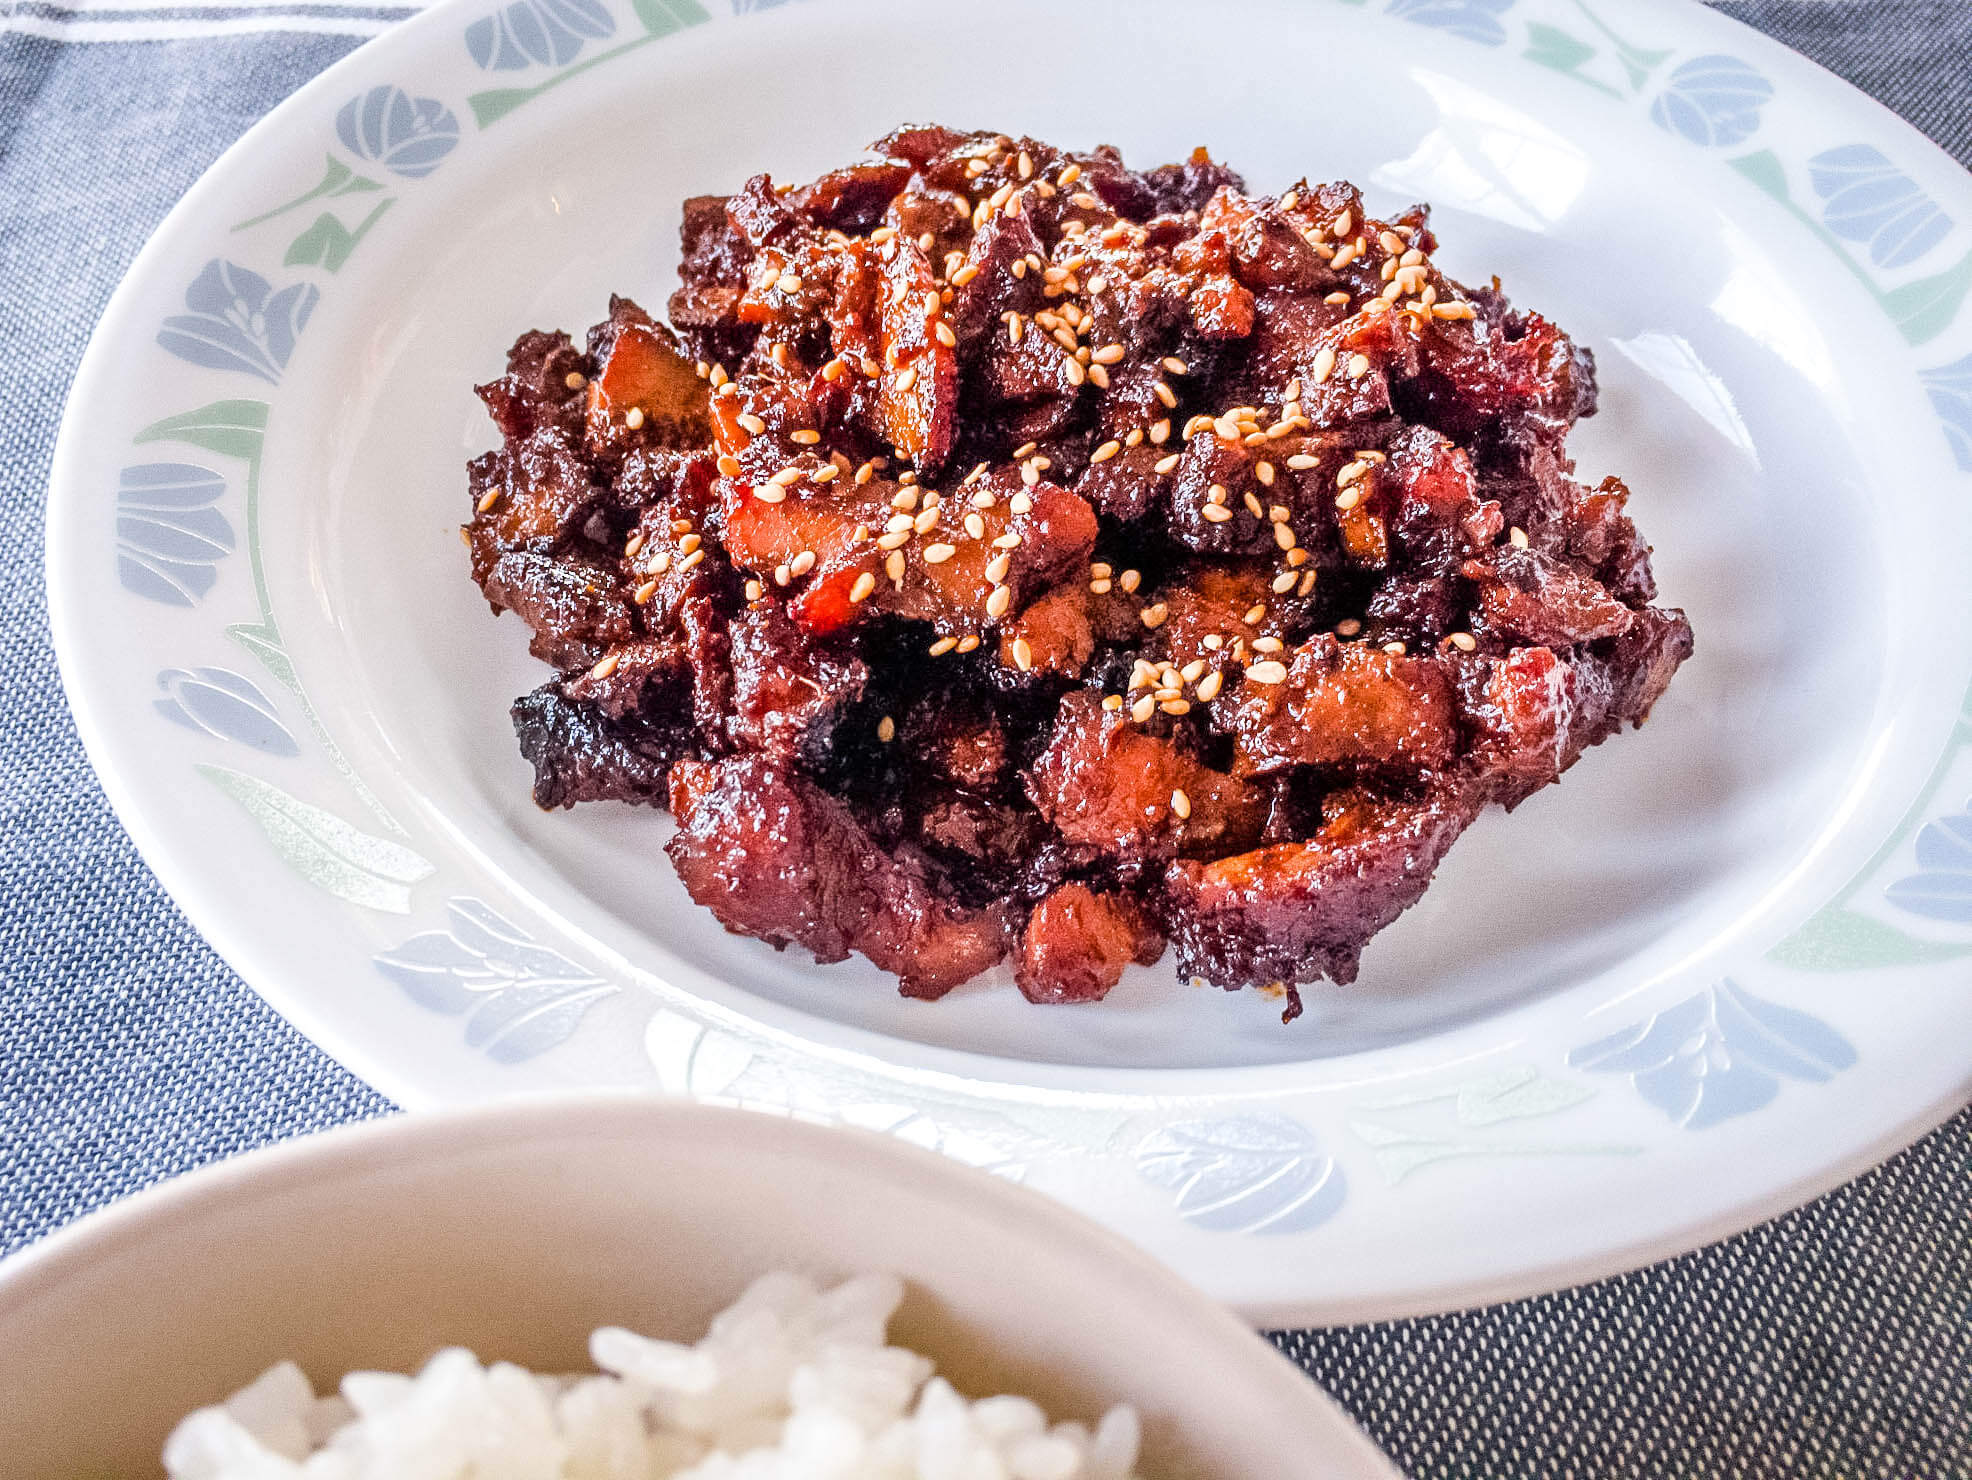 This stir-fried spicy chicken is marinated in a Korean red chili pepper paste (gochujang) based sauce.